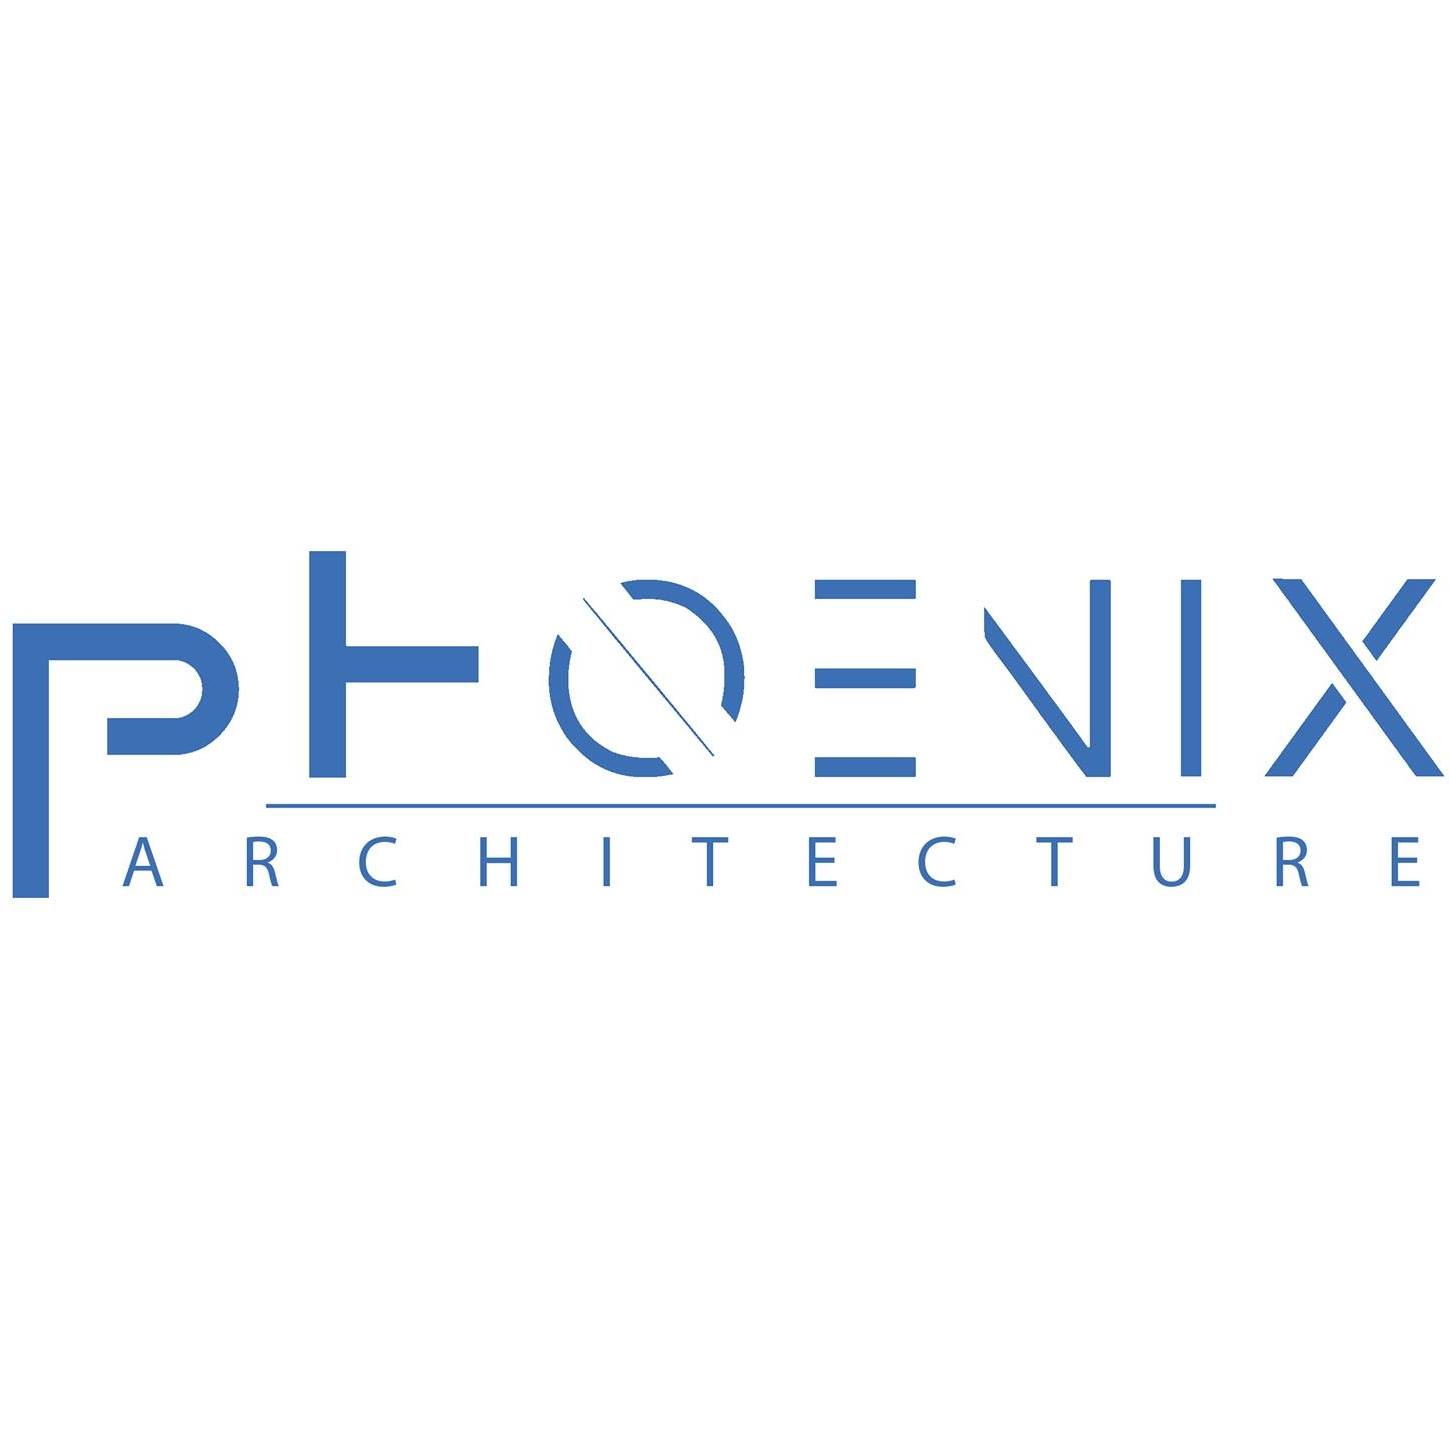 PHOENIX ARCHITECTURE|Accounting Services|Professional Services